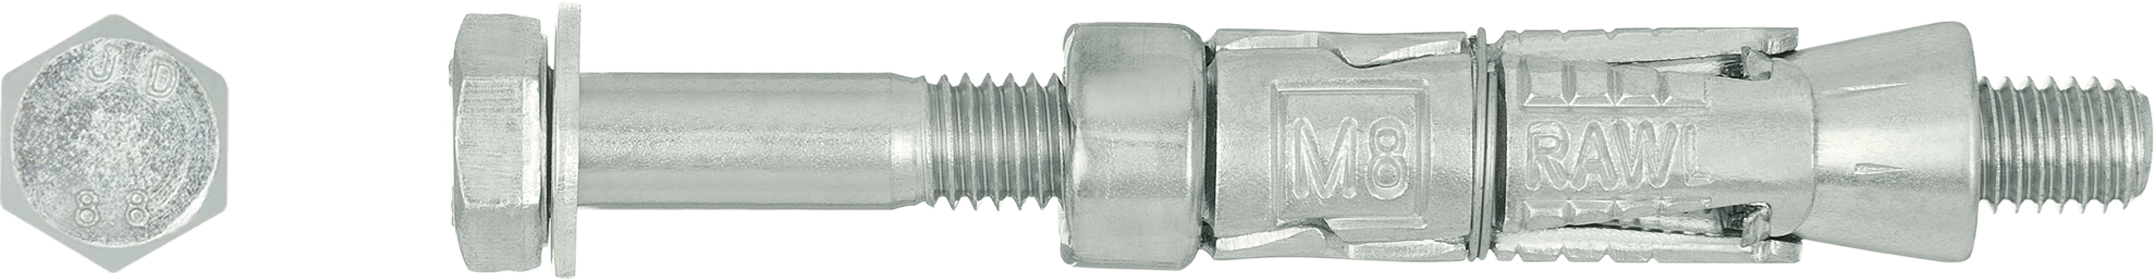 R-RBL Rawlbolt® - Loose Bolt for use in cracked and non-cracked concrete